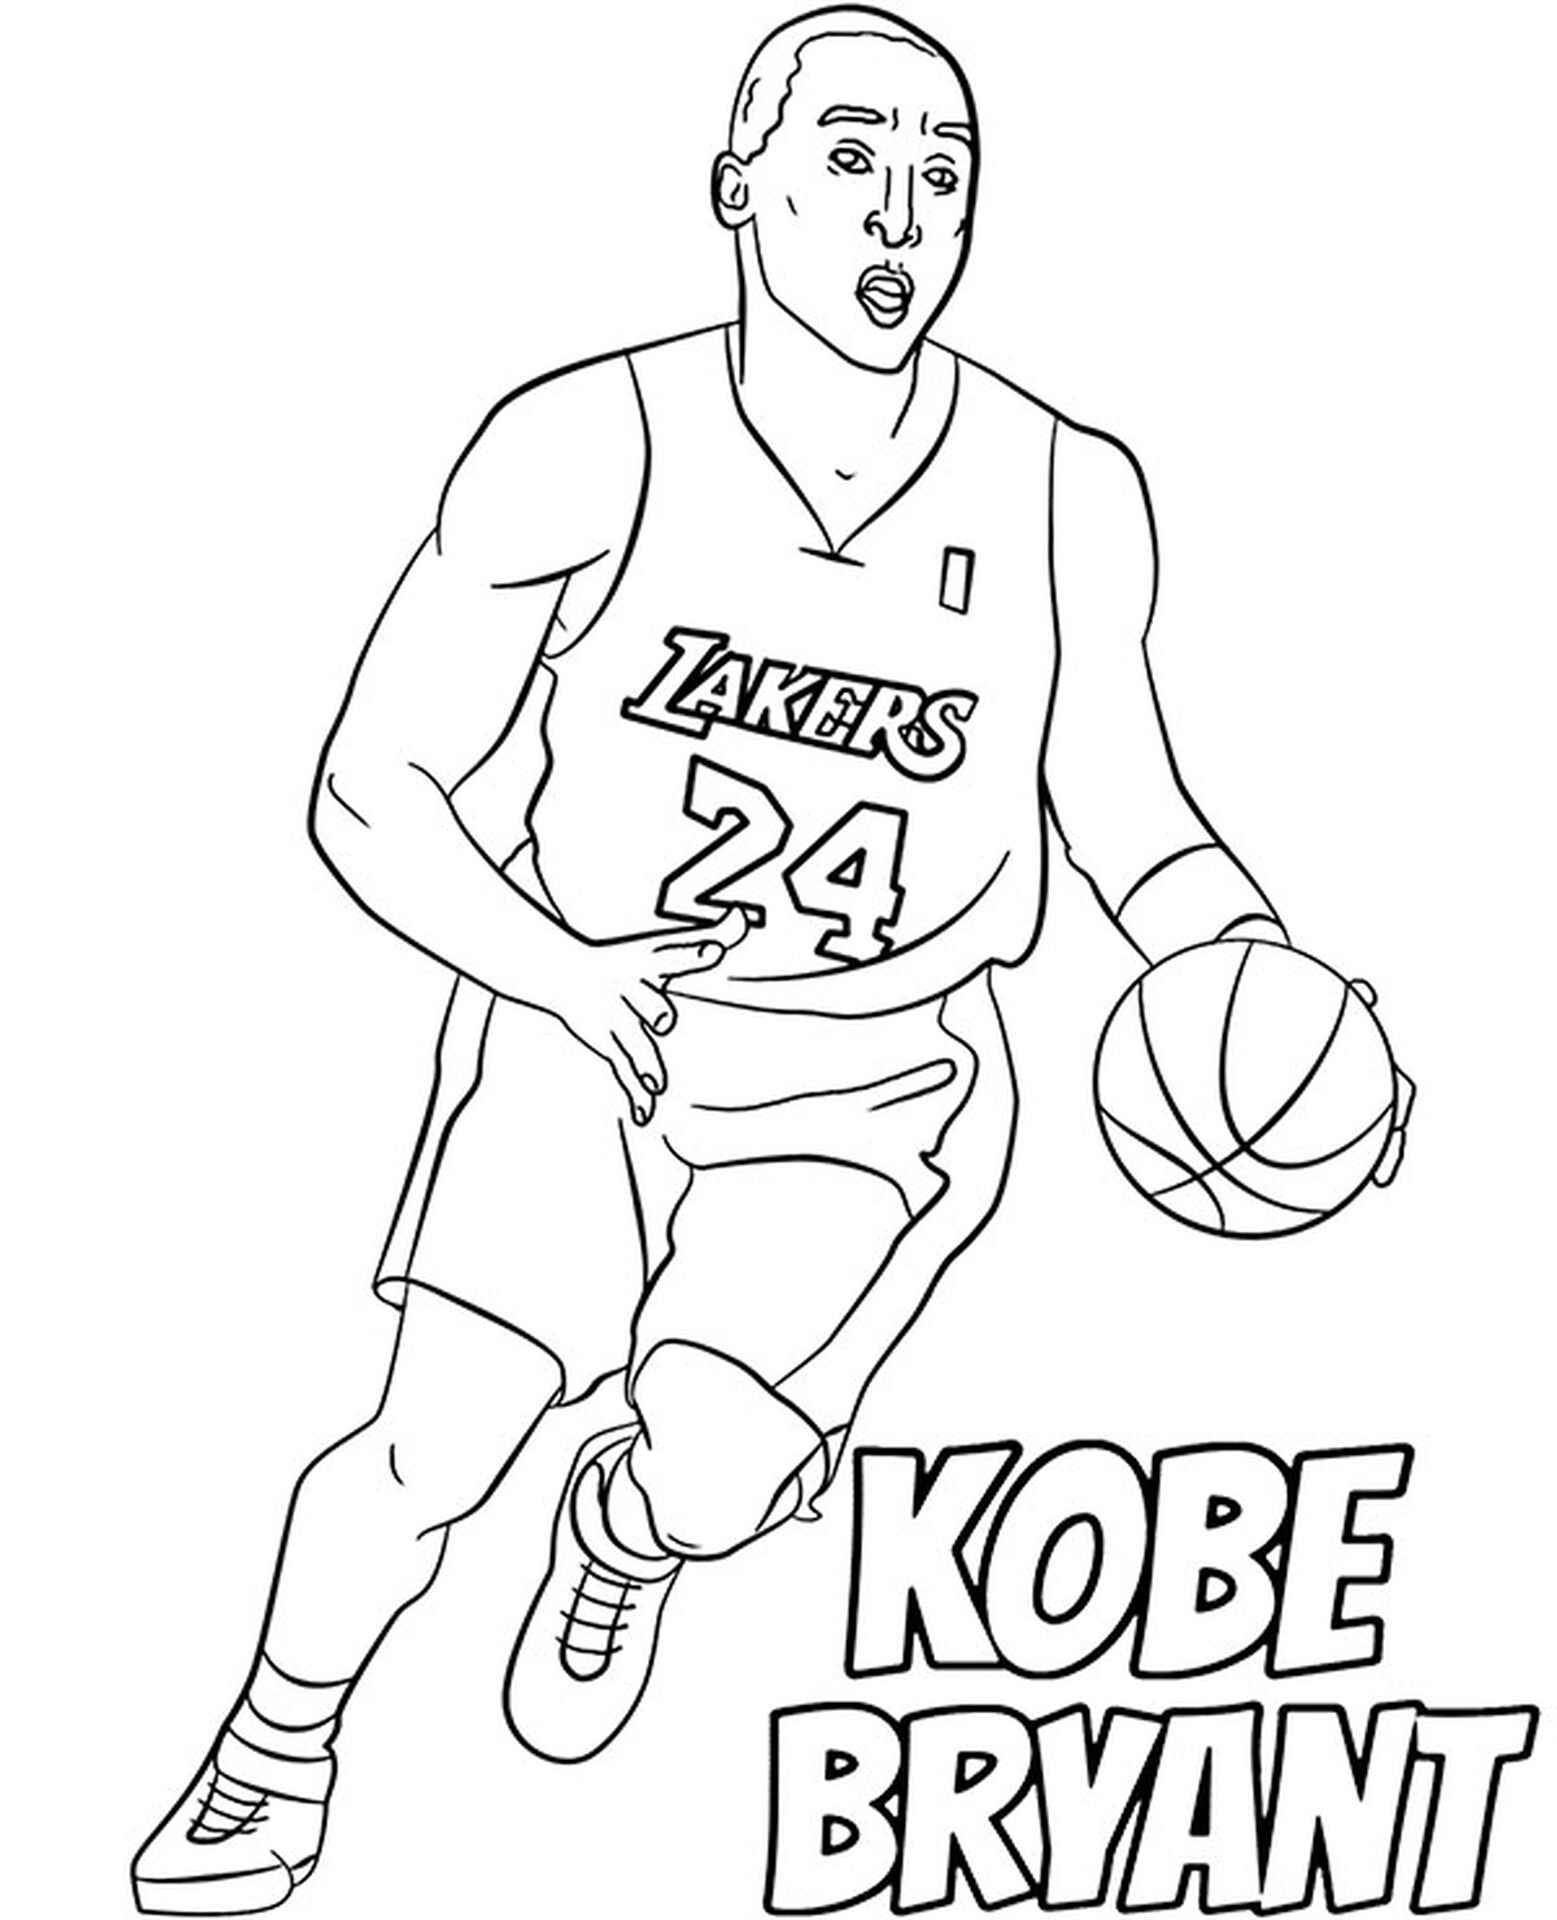 image of kobe bryant running with a basketball